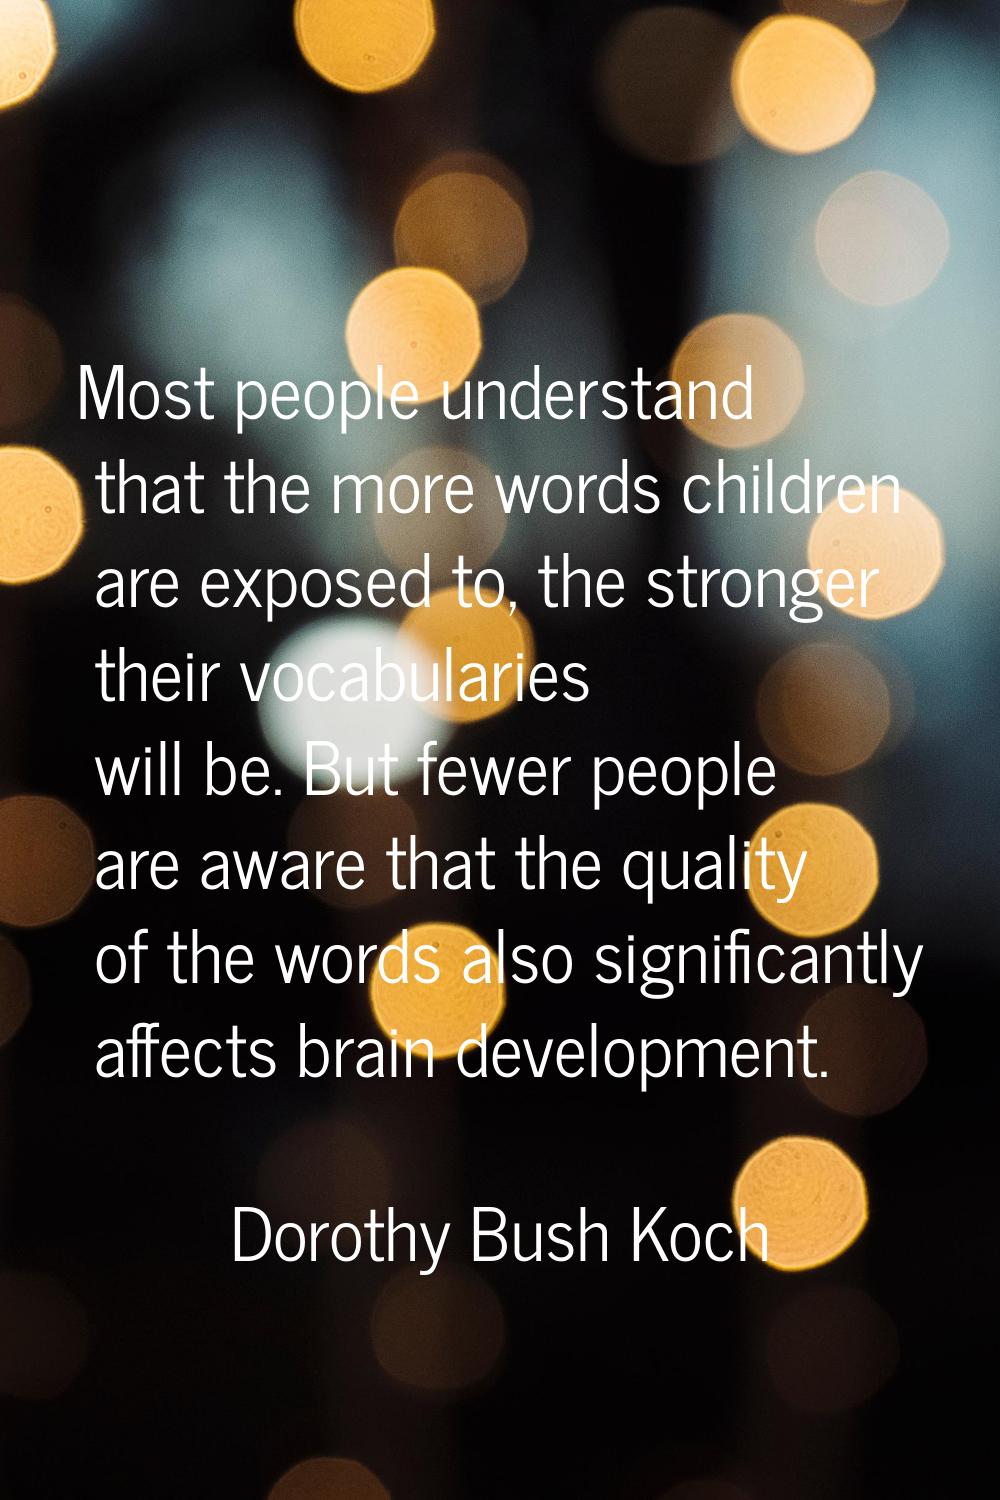 Most people understand that the more words children are exposed to, the stronger their vocabularies